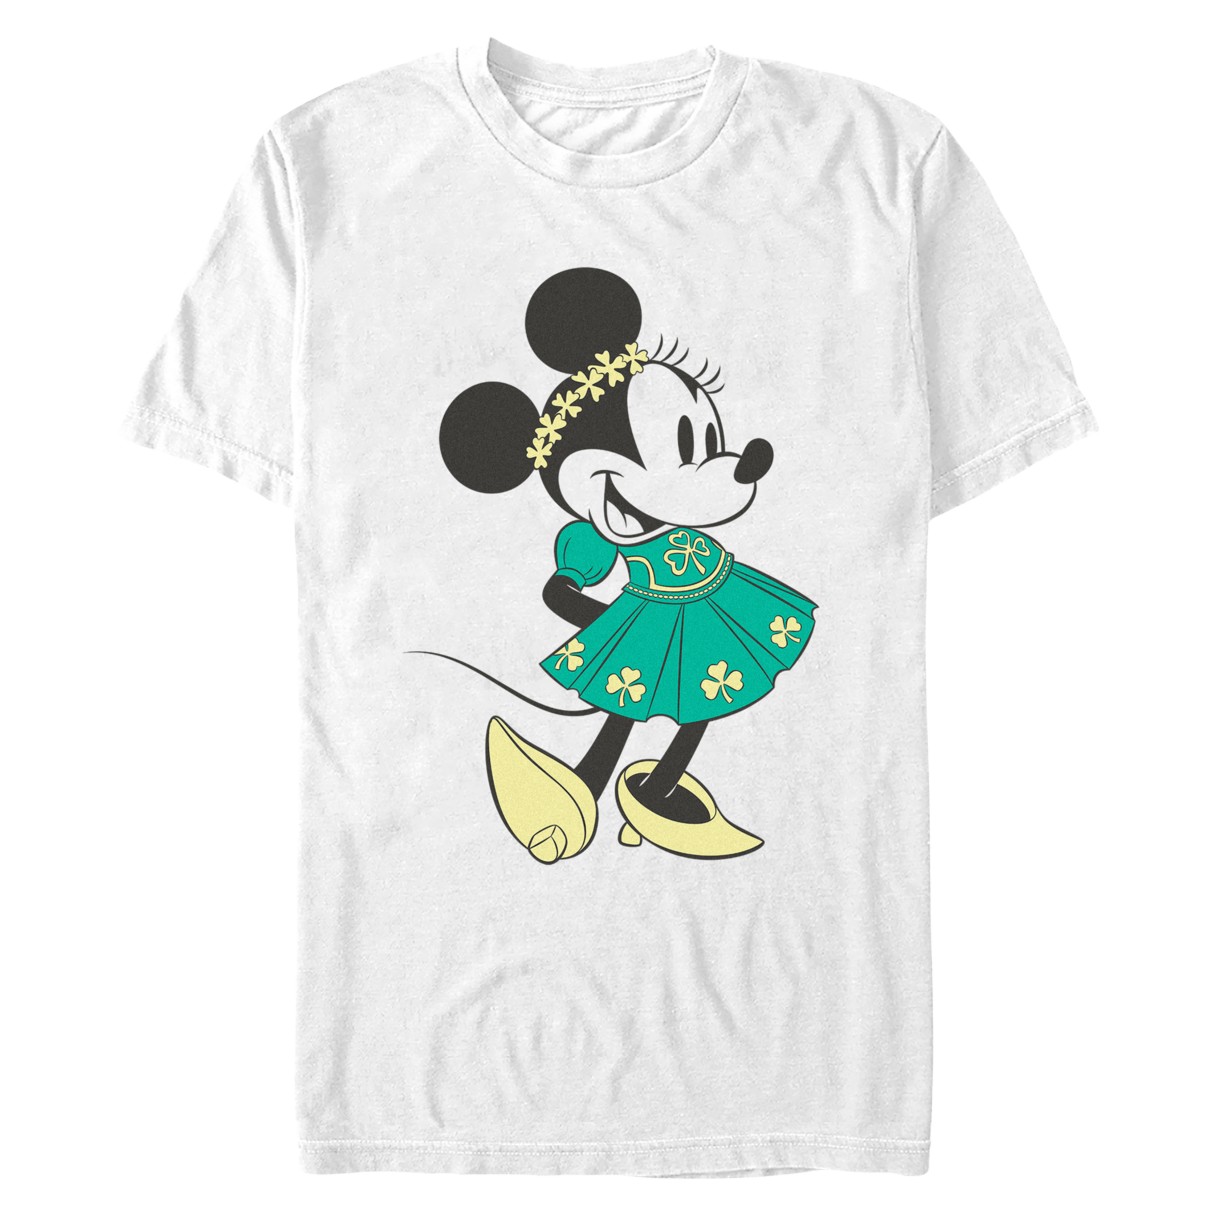 Minnie Mouse St. Patrick's Day T-Shirt for Adults